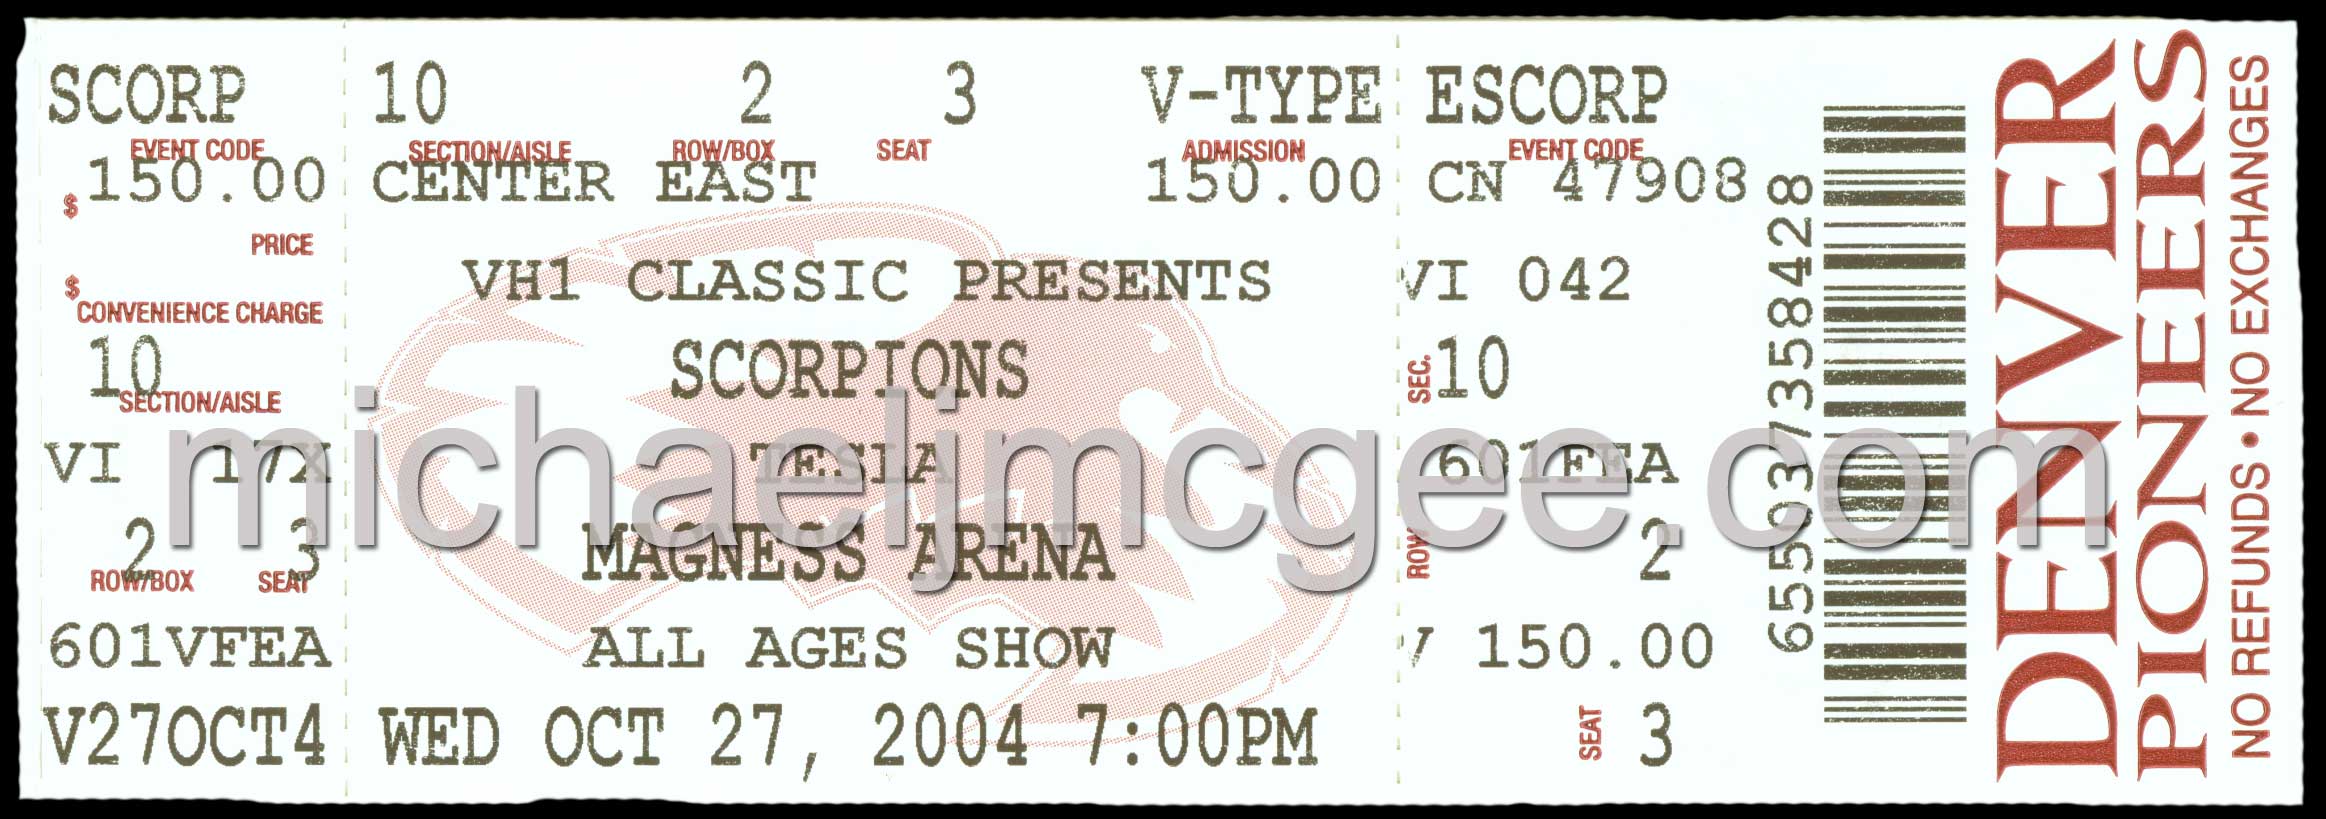 The Scorpions 1994 Face the Heat Tour